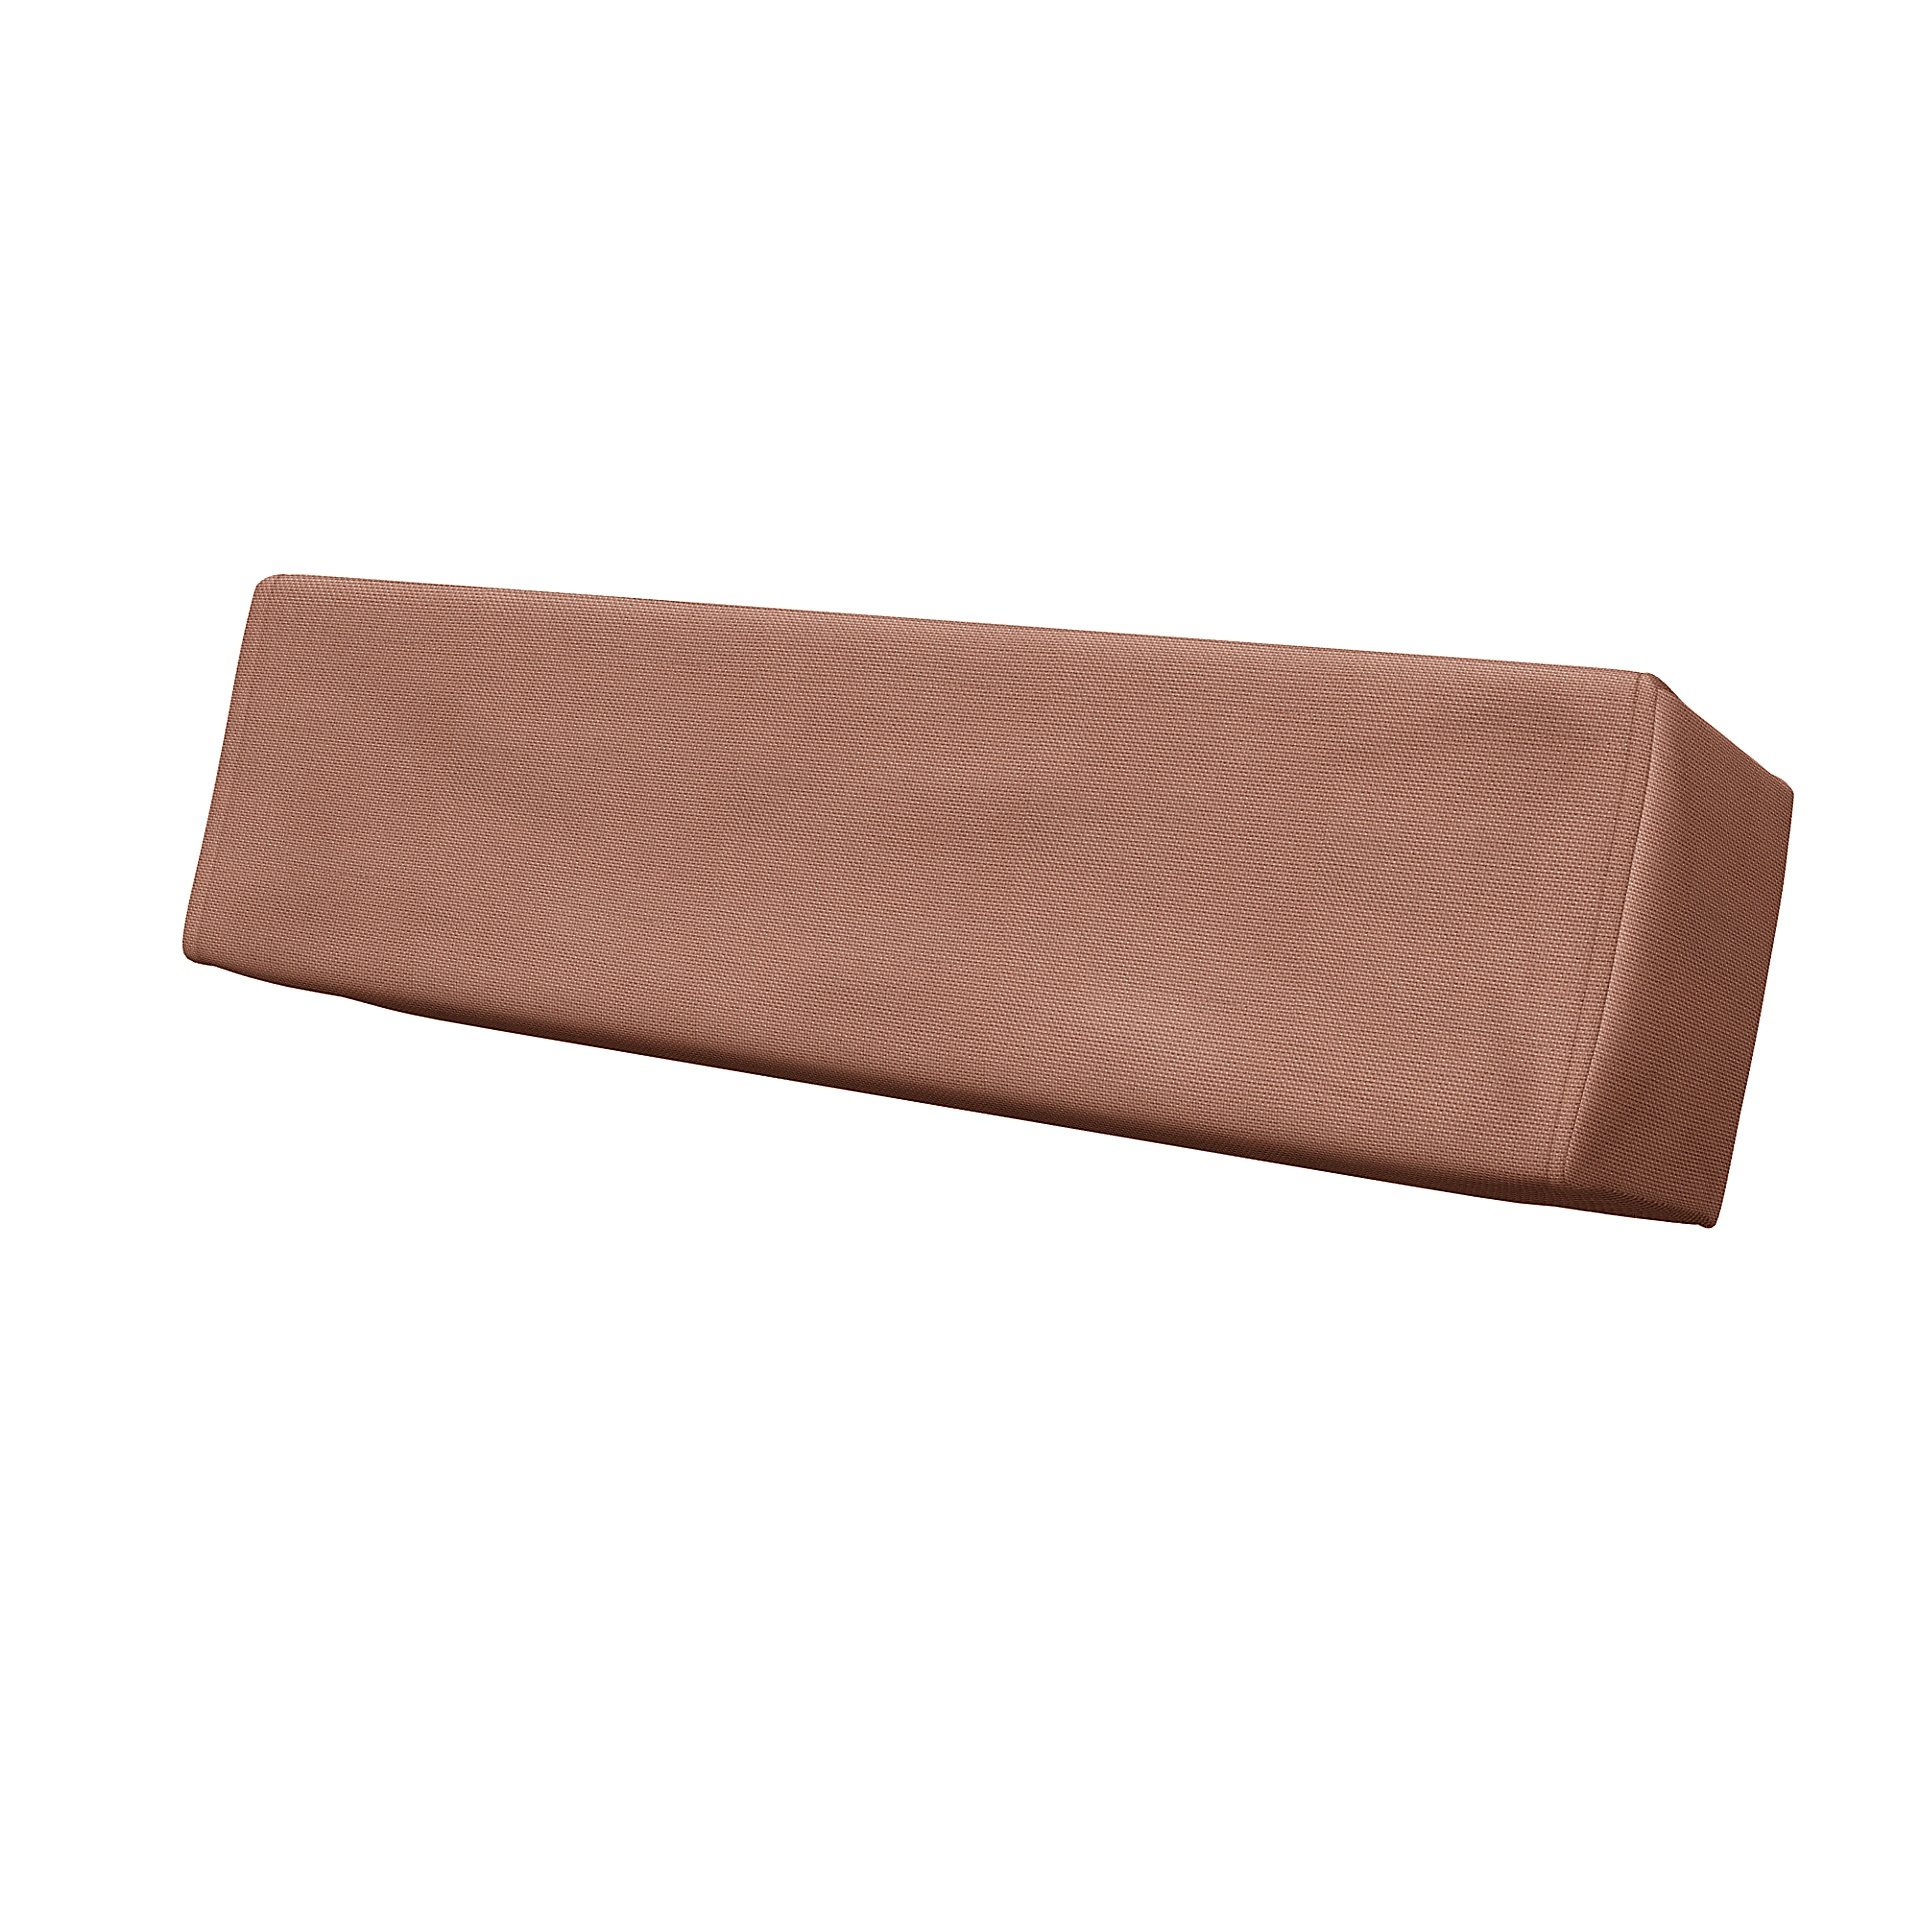 IKEA - Cushion Cover Beddinge Square , Dusty Pink, Outdoor - Bemz